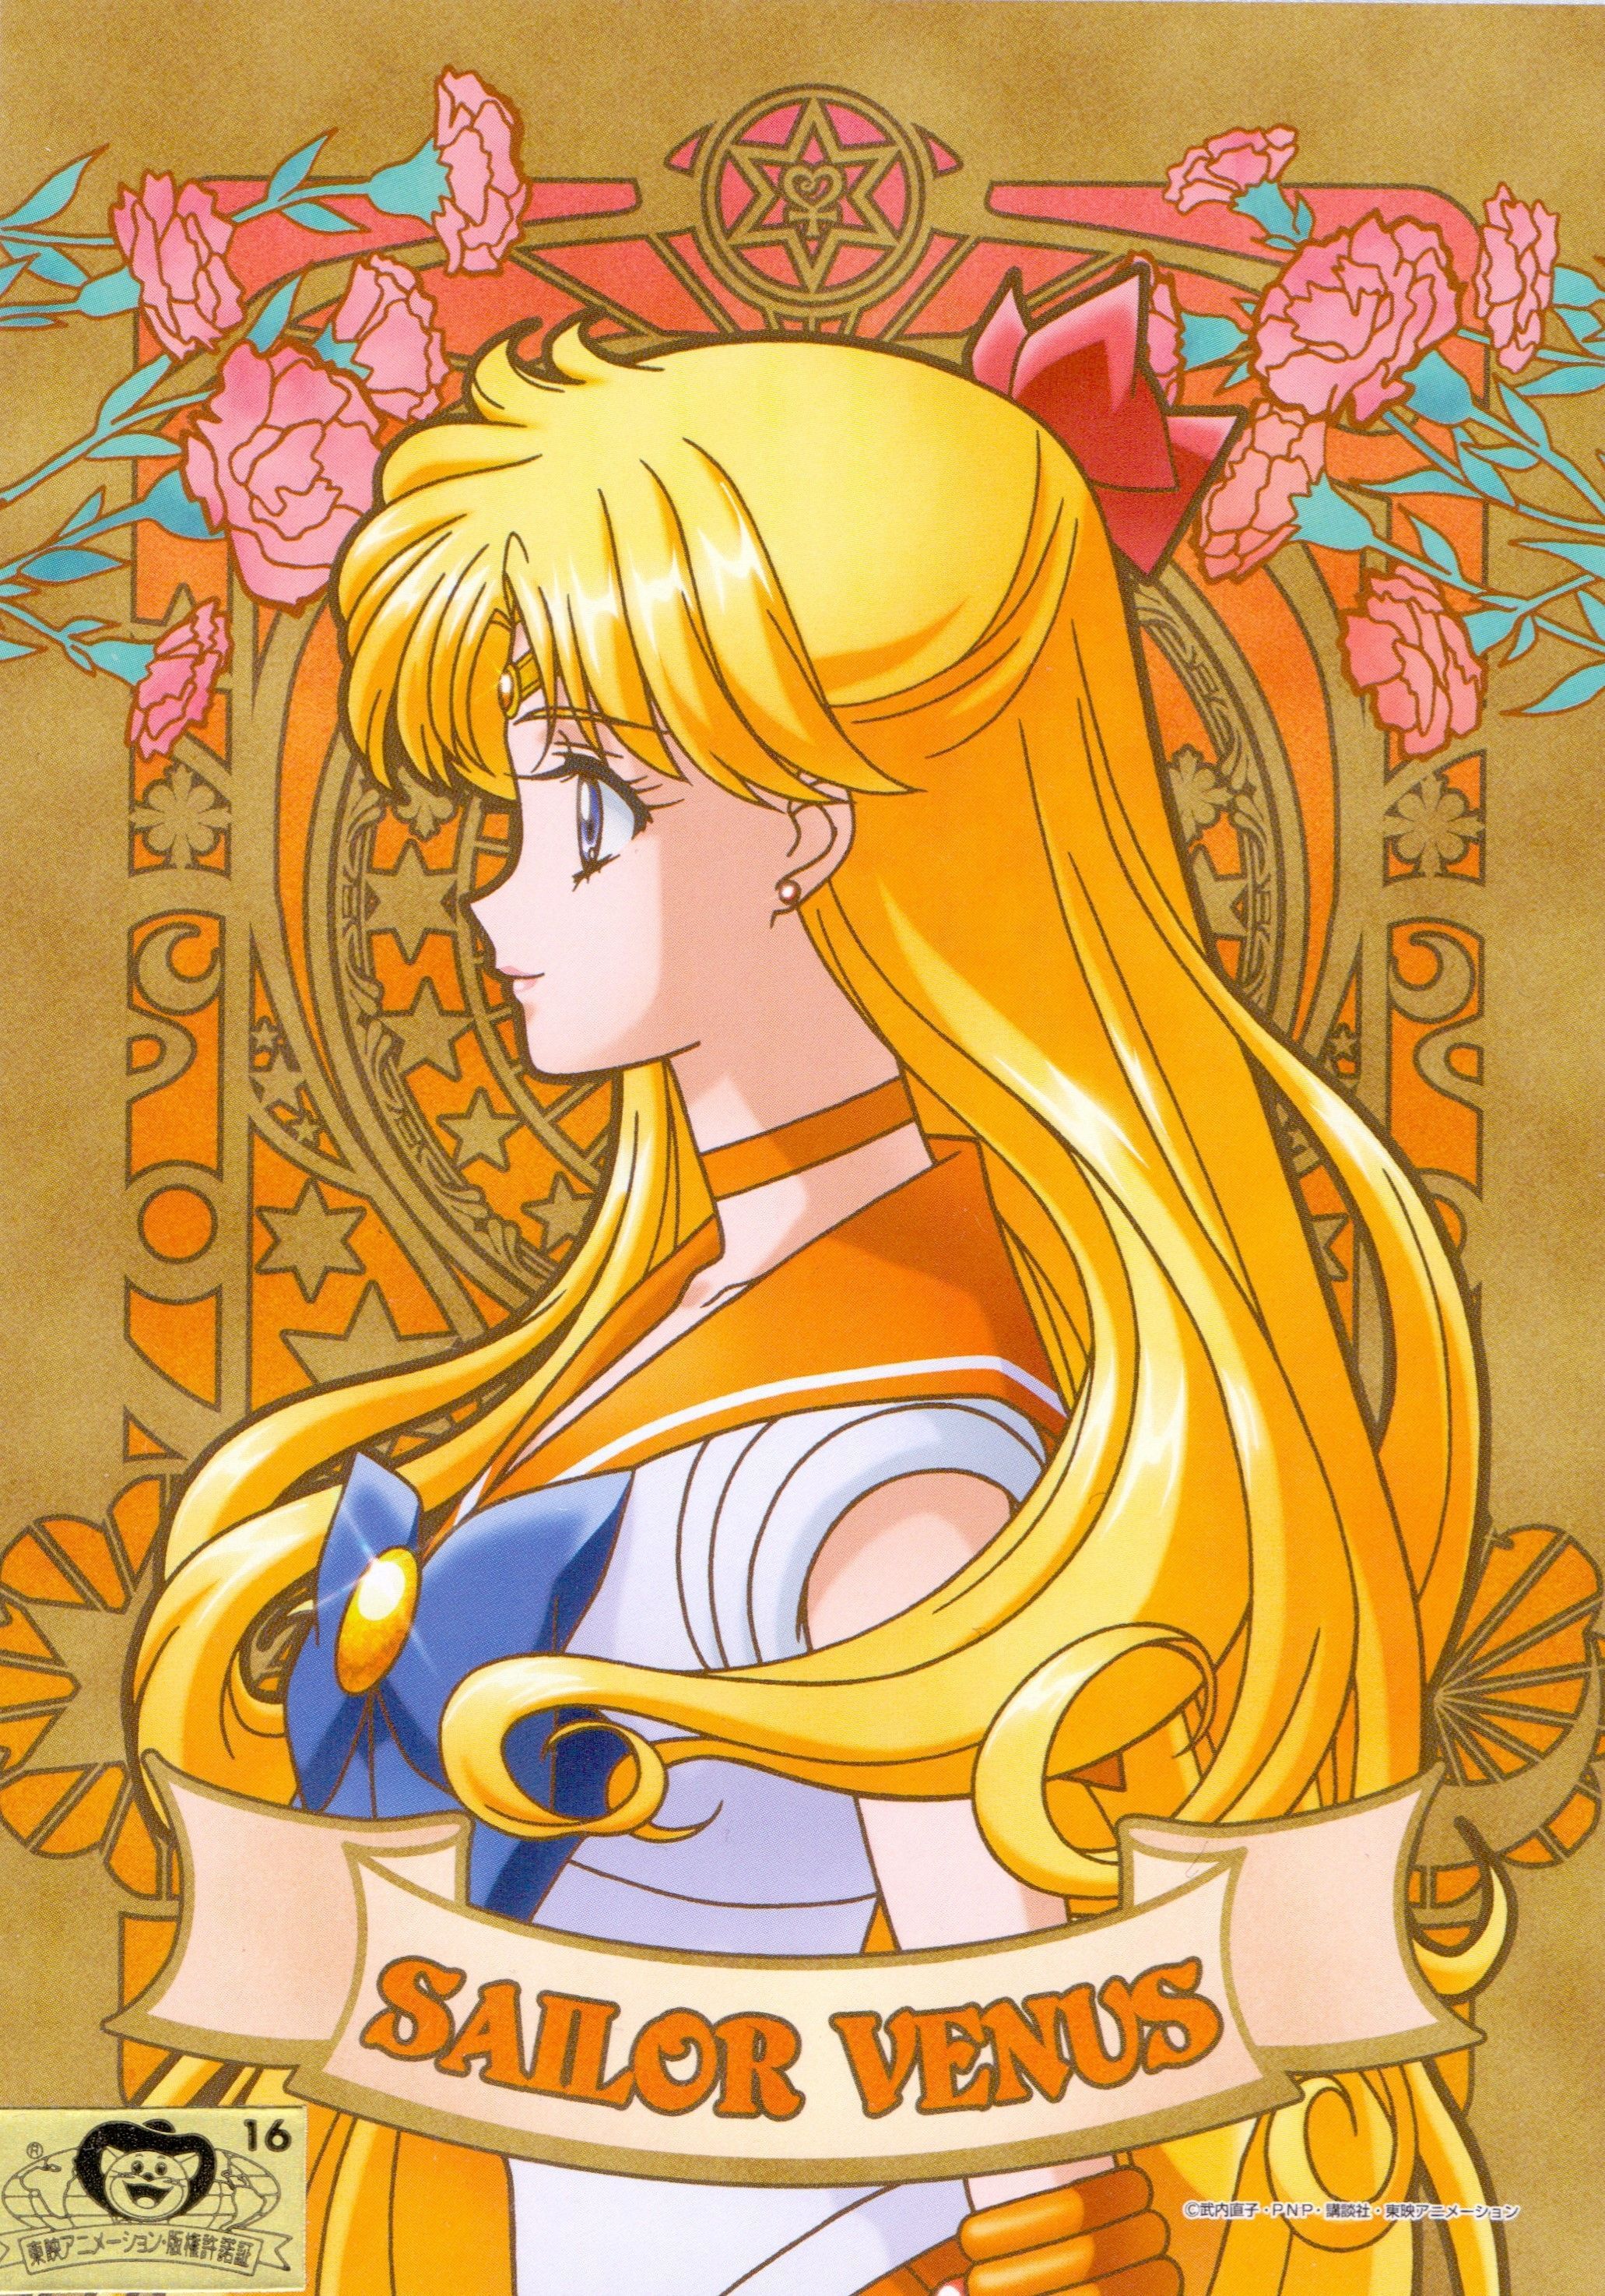 Sailor Venus is a character from the Sailor Moon manga and anime series. - Sailor Venus